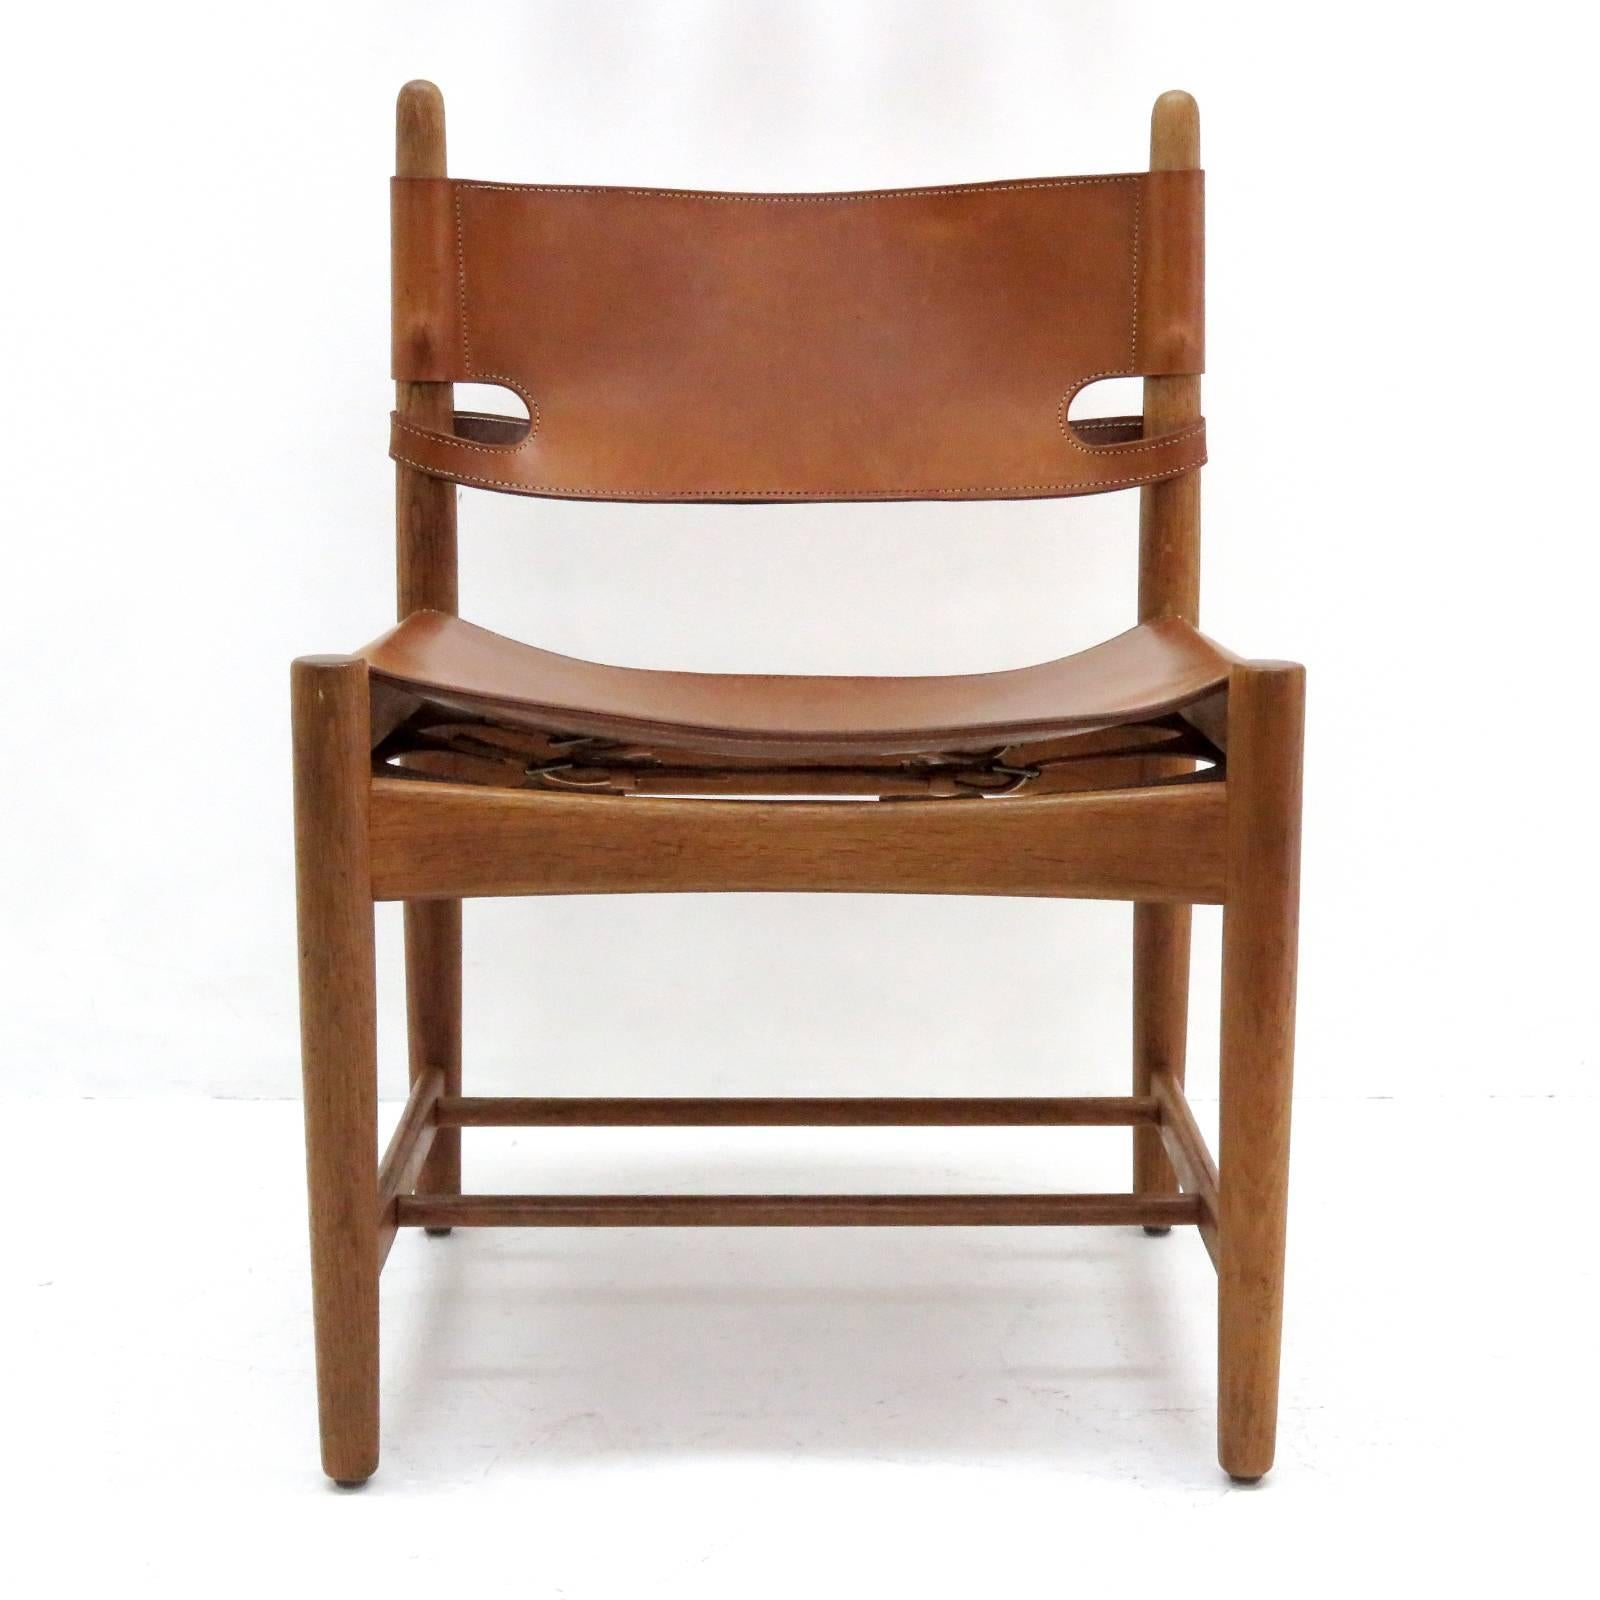 Wonderful set of Børge Mogensen 'Hunting' chairs, model no. 3251 for Fredericia Furniture, with saddle leather on oak frames, great patina.